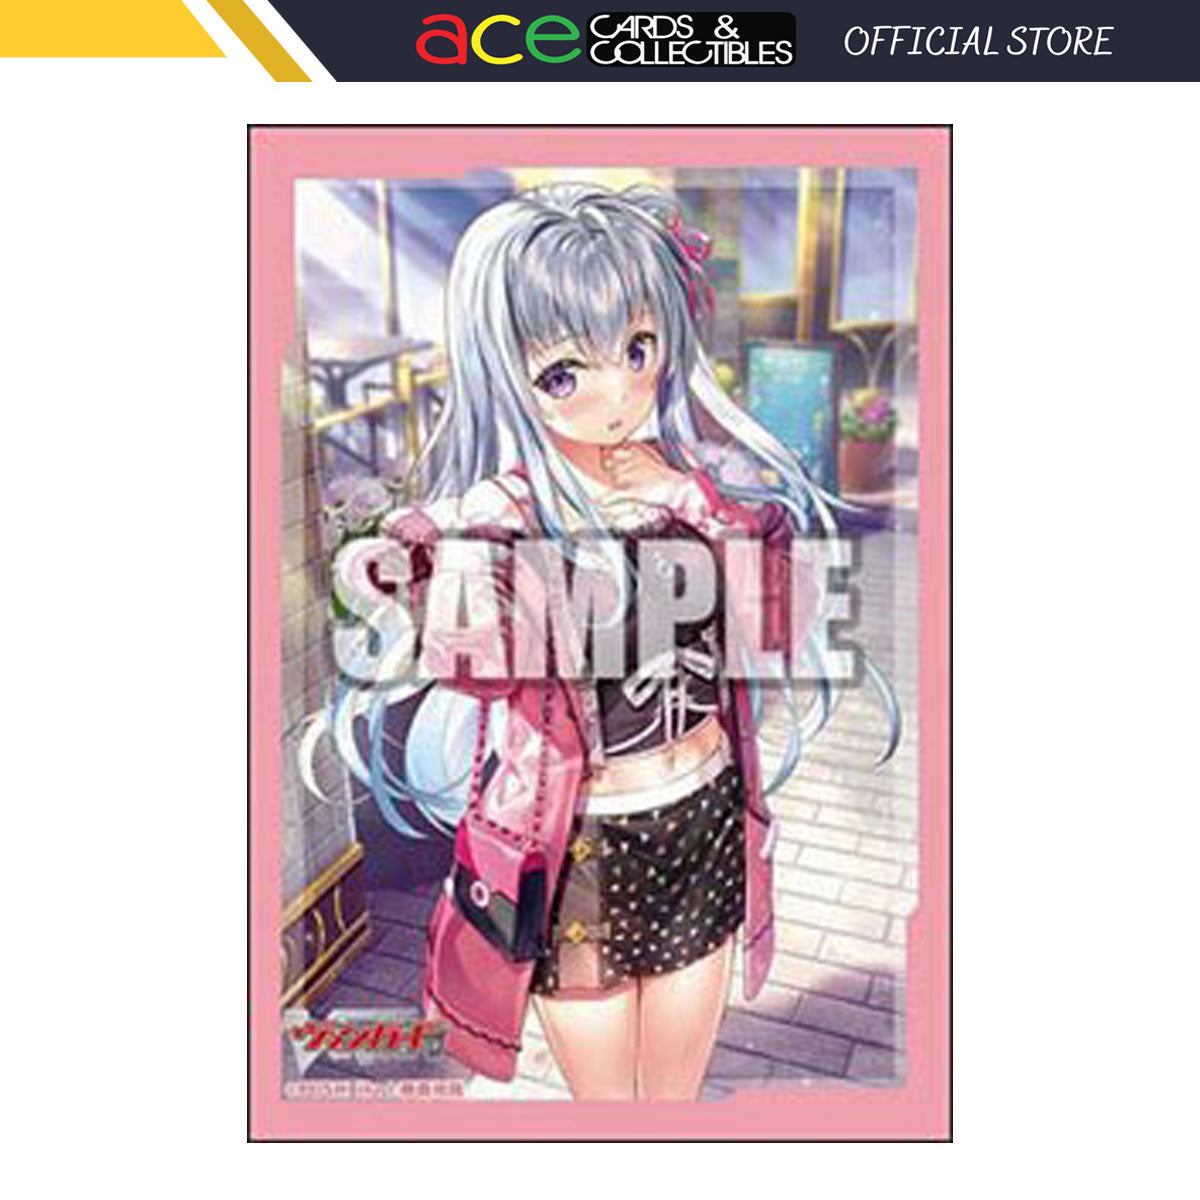 CardFight Vanguard OverDress Sleeve Collection Mini Vol. 597 "Astesice x Live, Kairi"-Bushiroad-Ace Cards & Collectibles